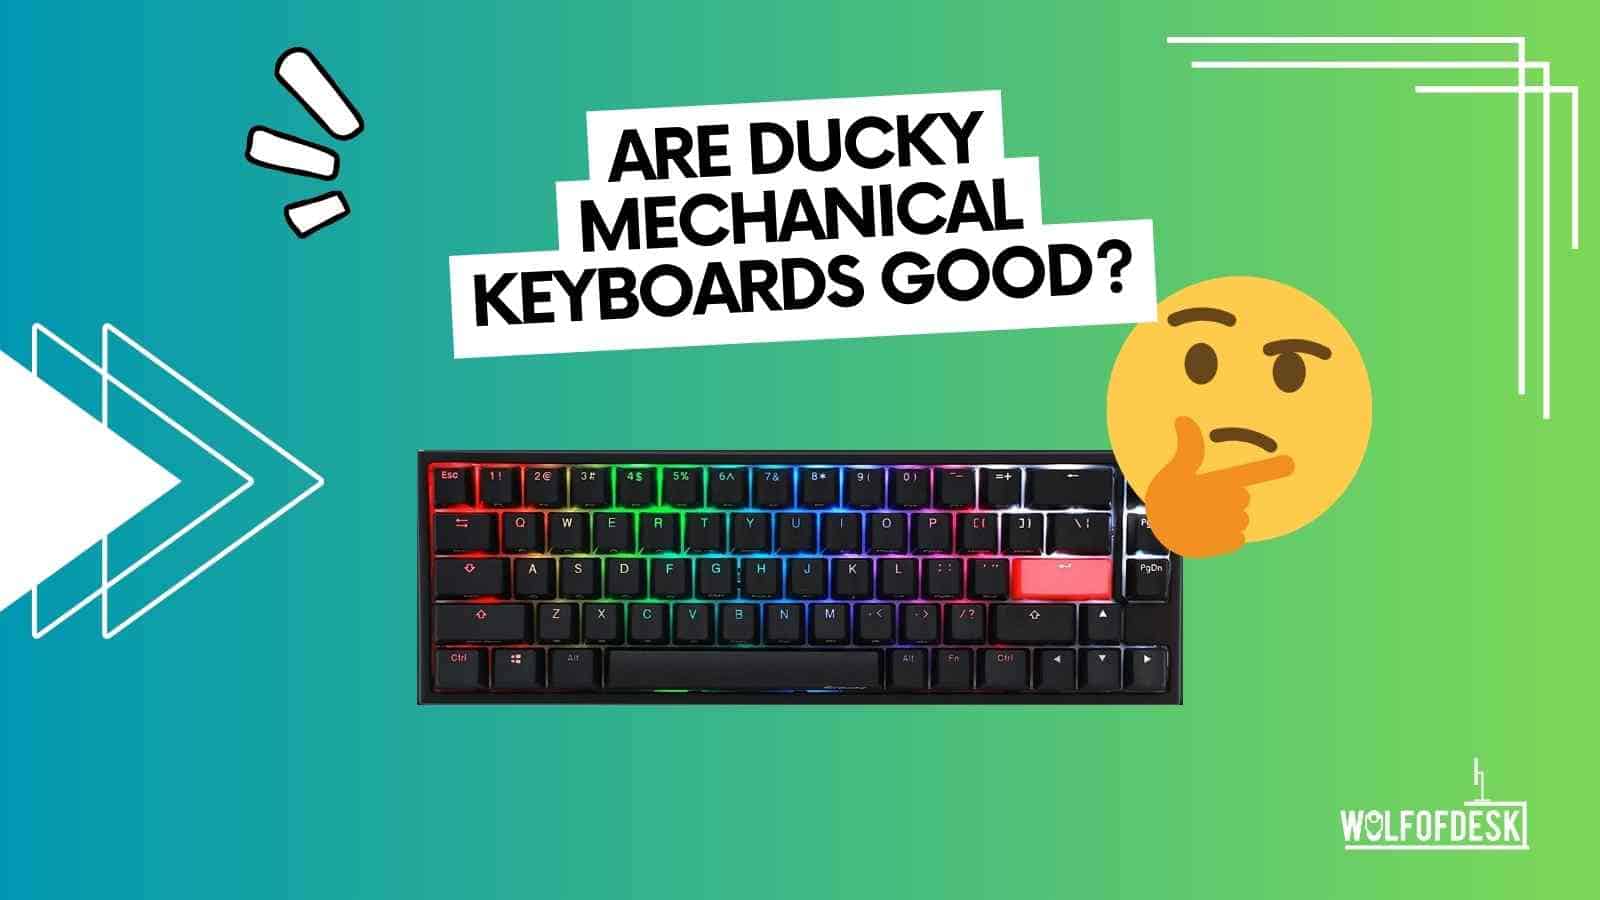 are ducky keyboard any good? - answered